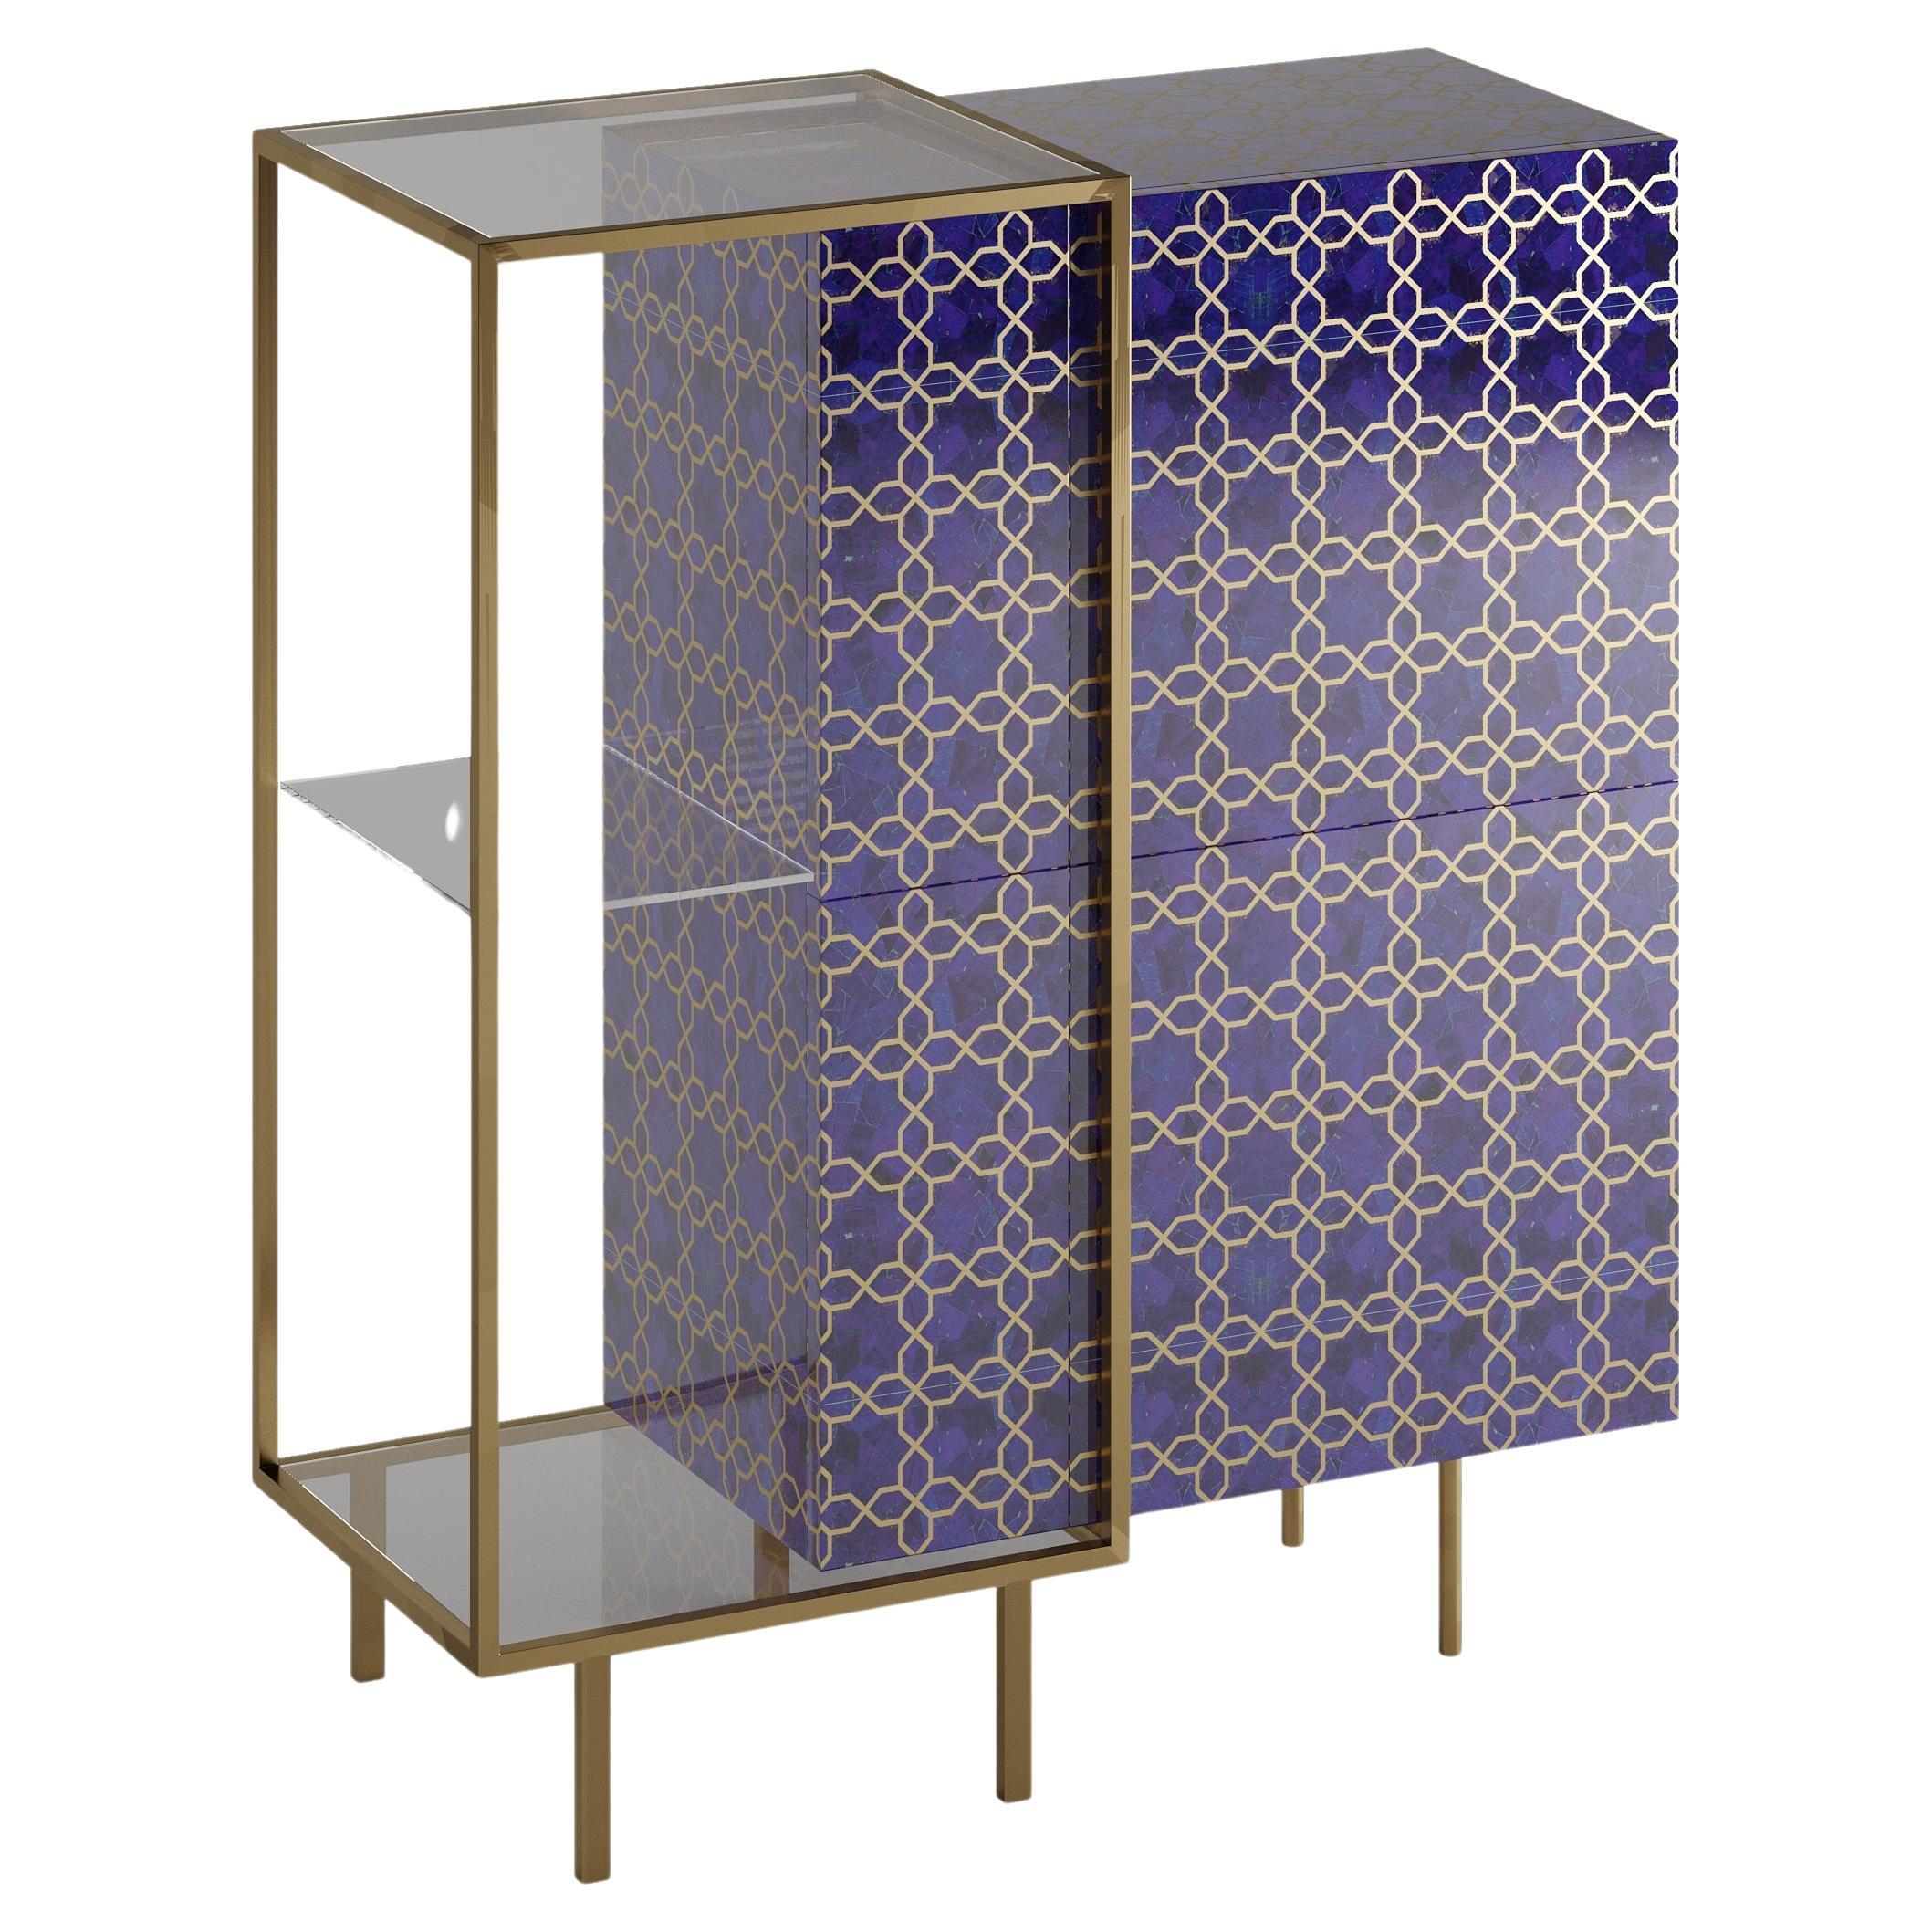 Maghreb Sideboard In Semi-Precious Stone With Metal Accent For Sale